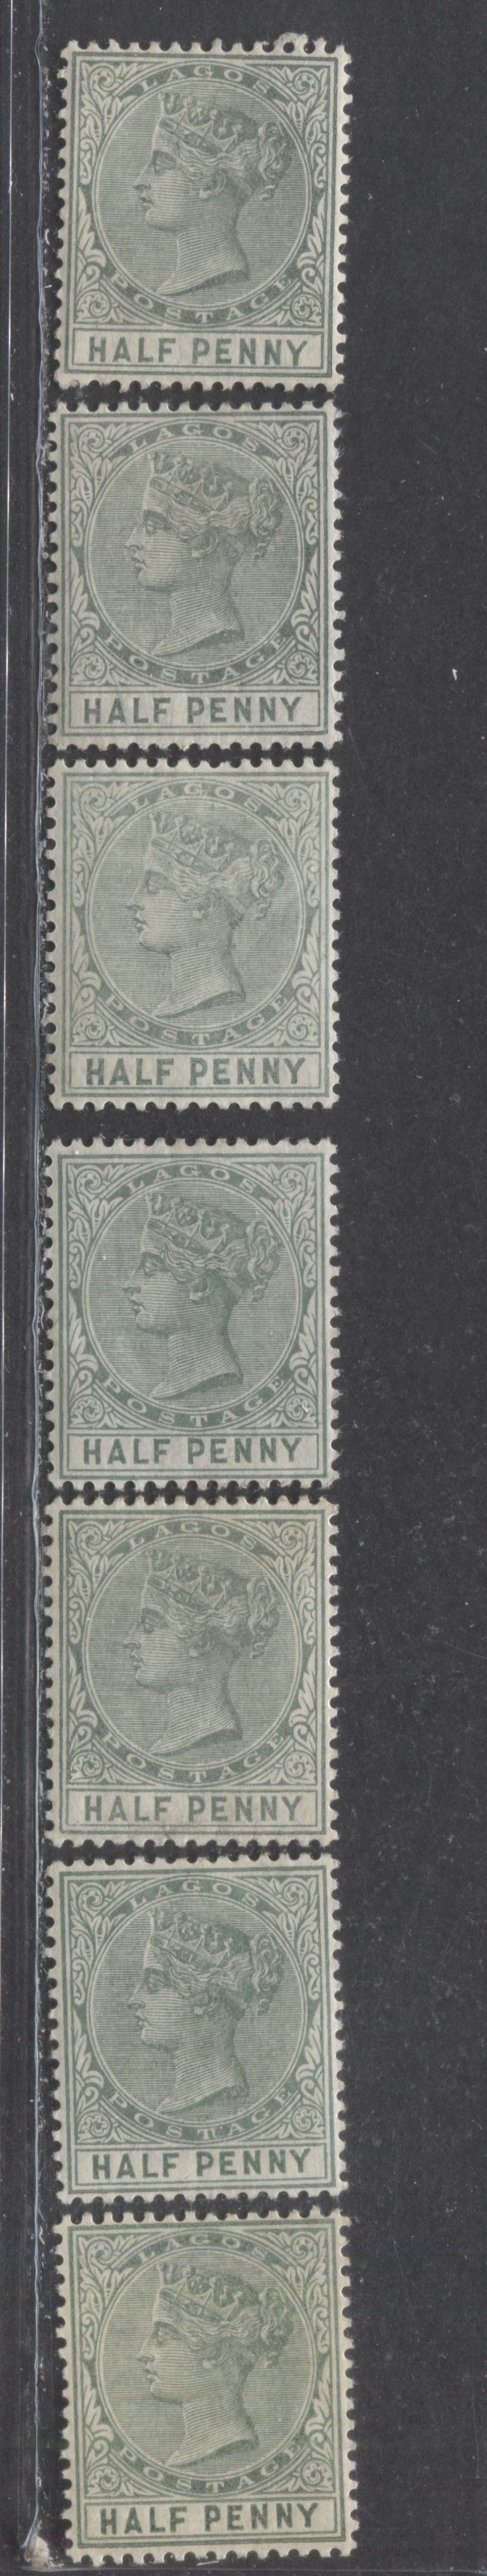 Lot 256 Lagos SG#21 (SC#13) 1/2d Green, Queen Victoria, 1884-1886 Second Crown CA Watermarked Issue, A Mint Group of 7 Different Printings, Likely Between 1897 and 1900, 2022 Scott Classic Cat. $15.75 USD For The Common Printings